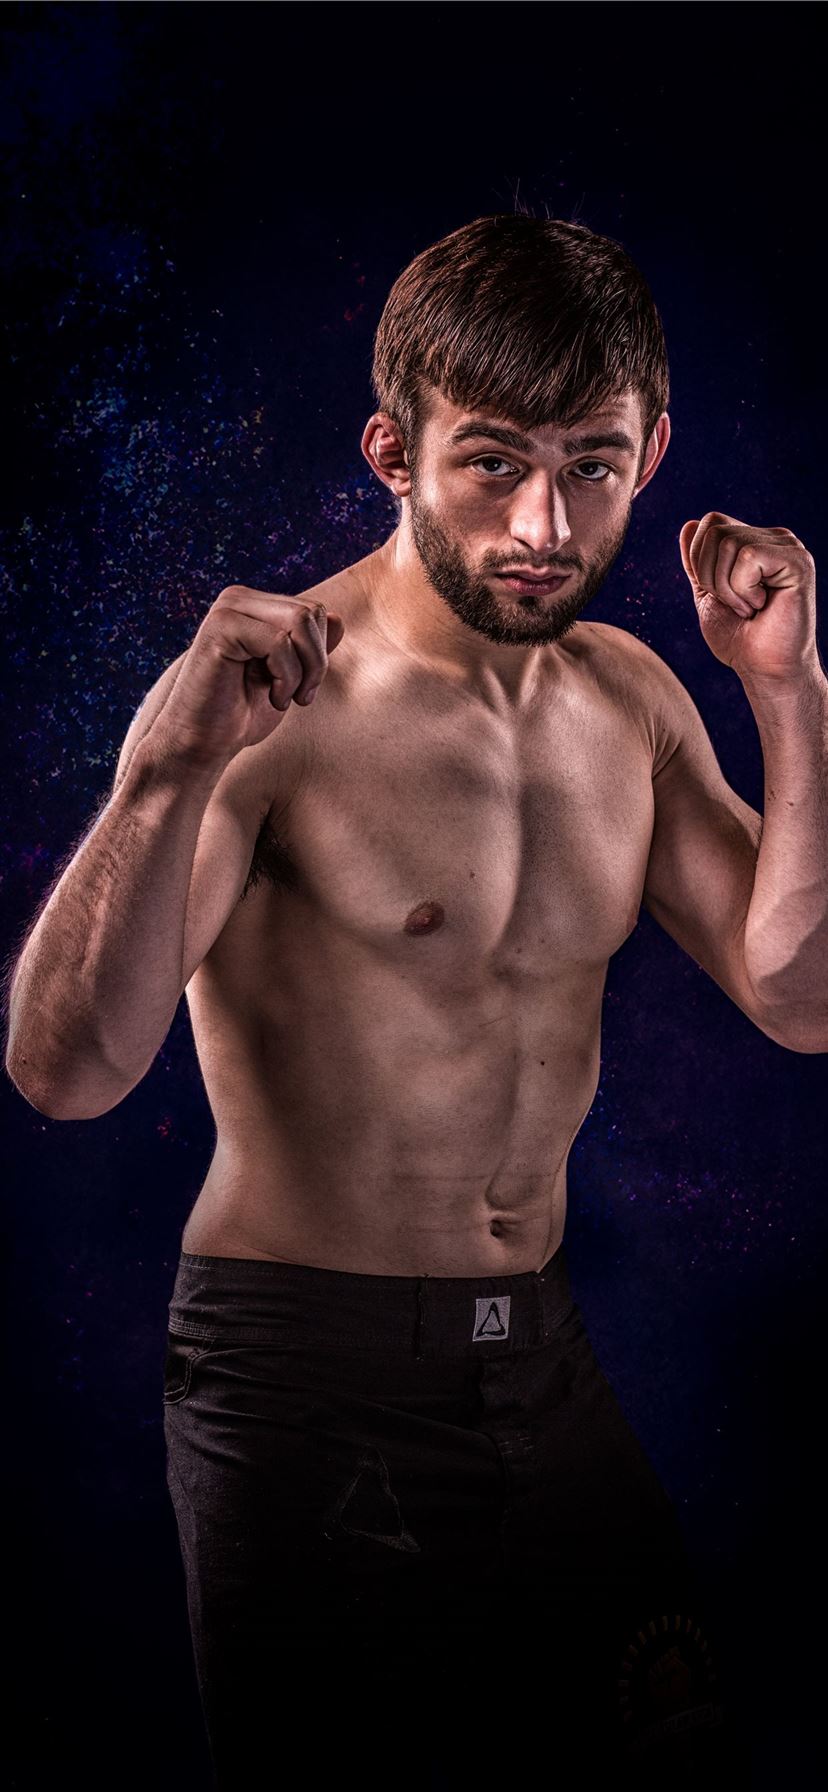 MMA Fighter Chase Henry Shot by Mark Hutto Applebo. iPhone X Wallpaper Free Download